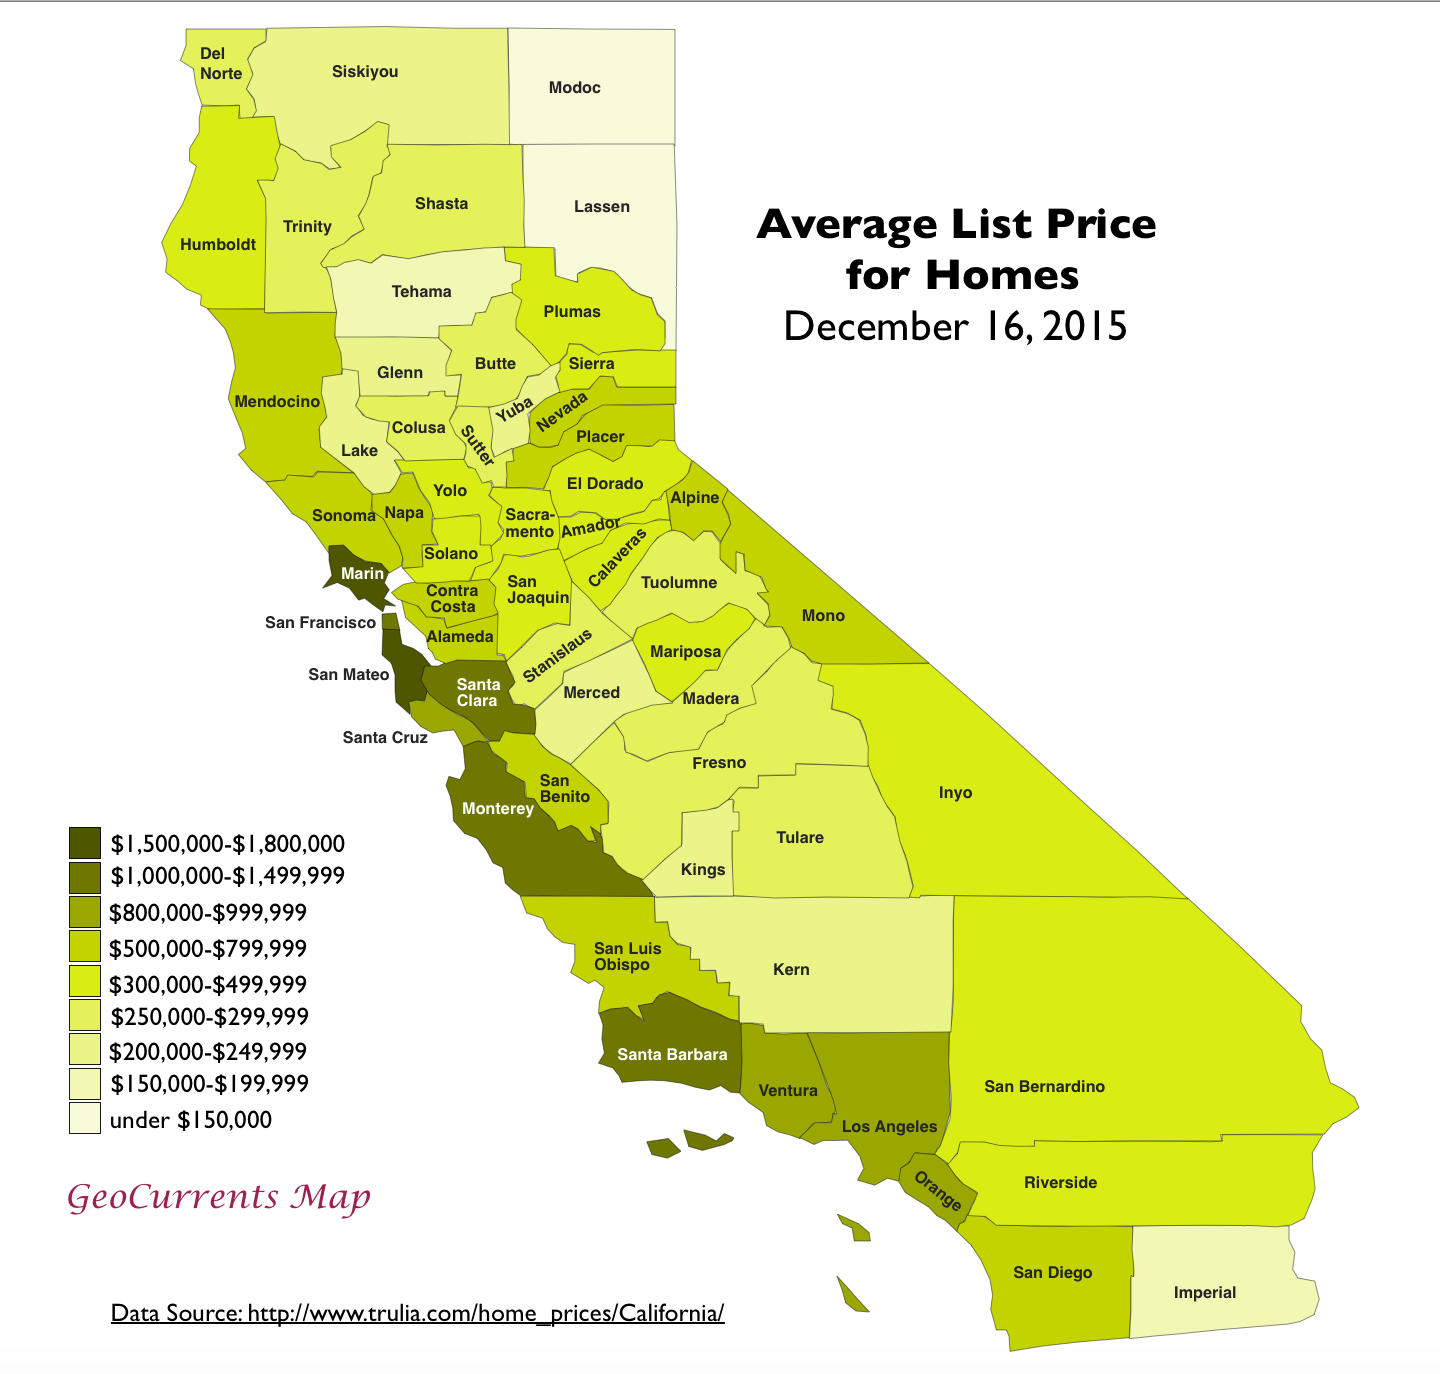 Mapping the Extraordinary Cost of Homes in California | GeoCurrents